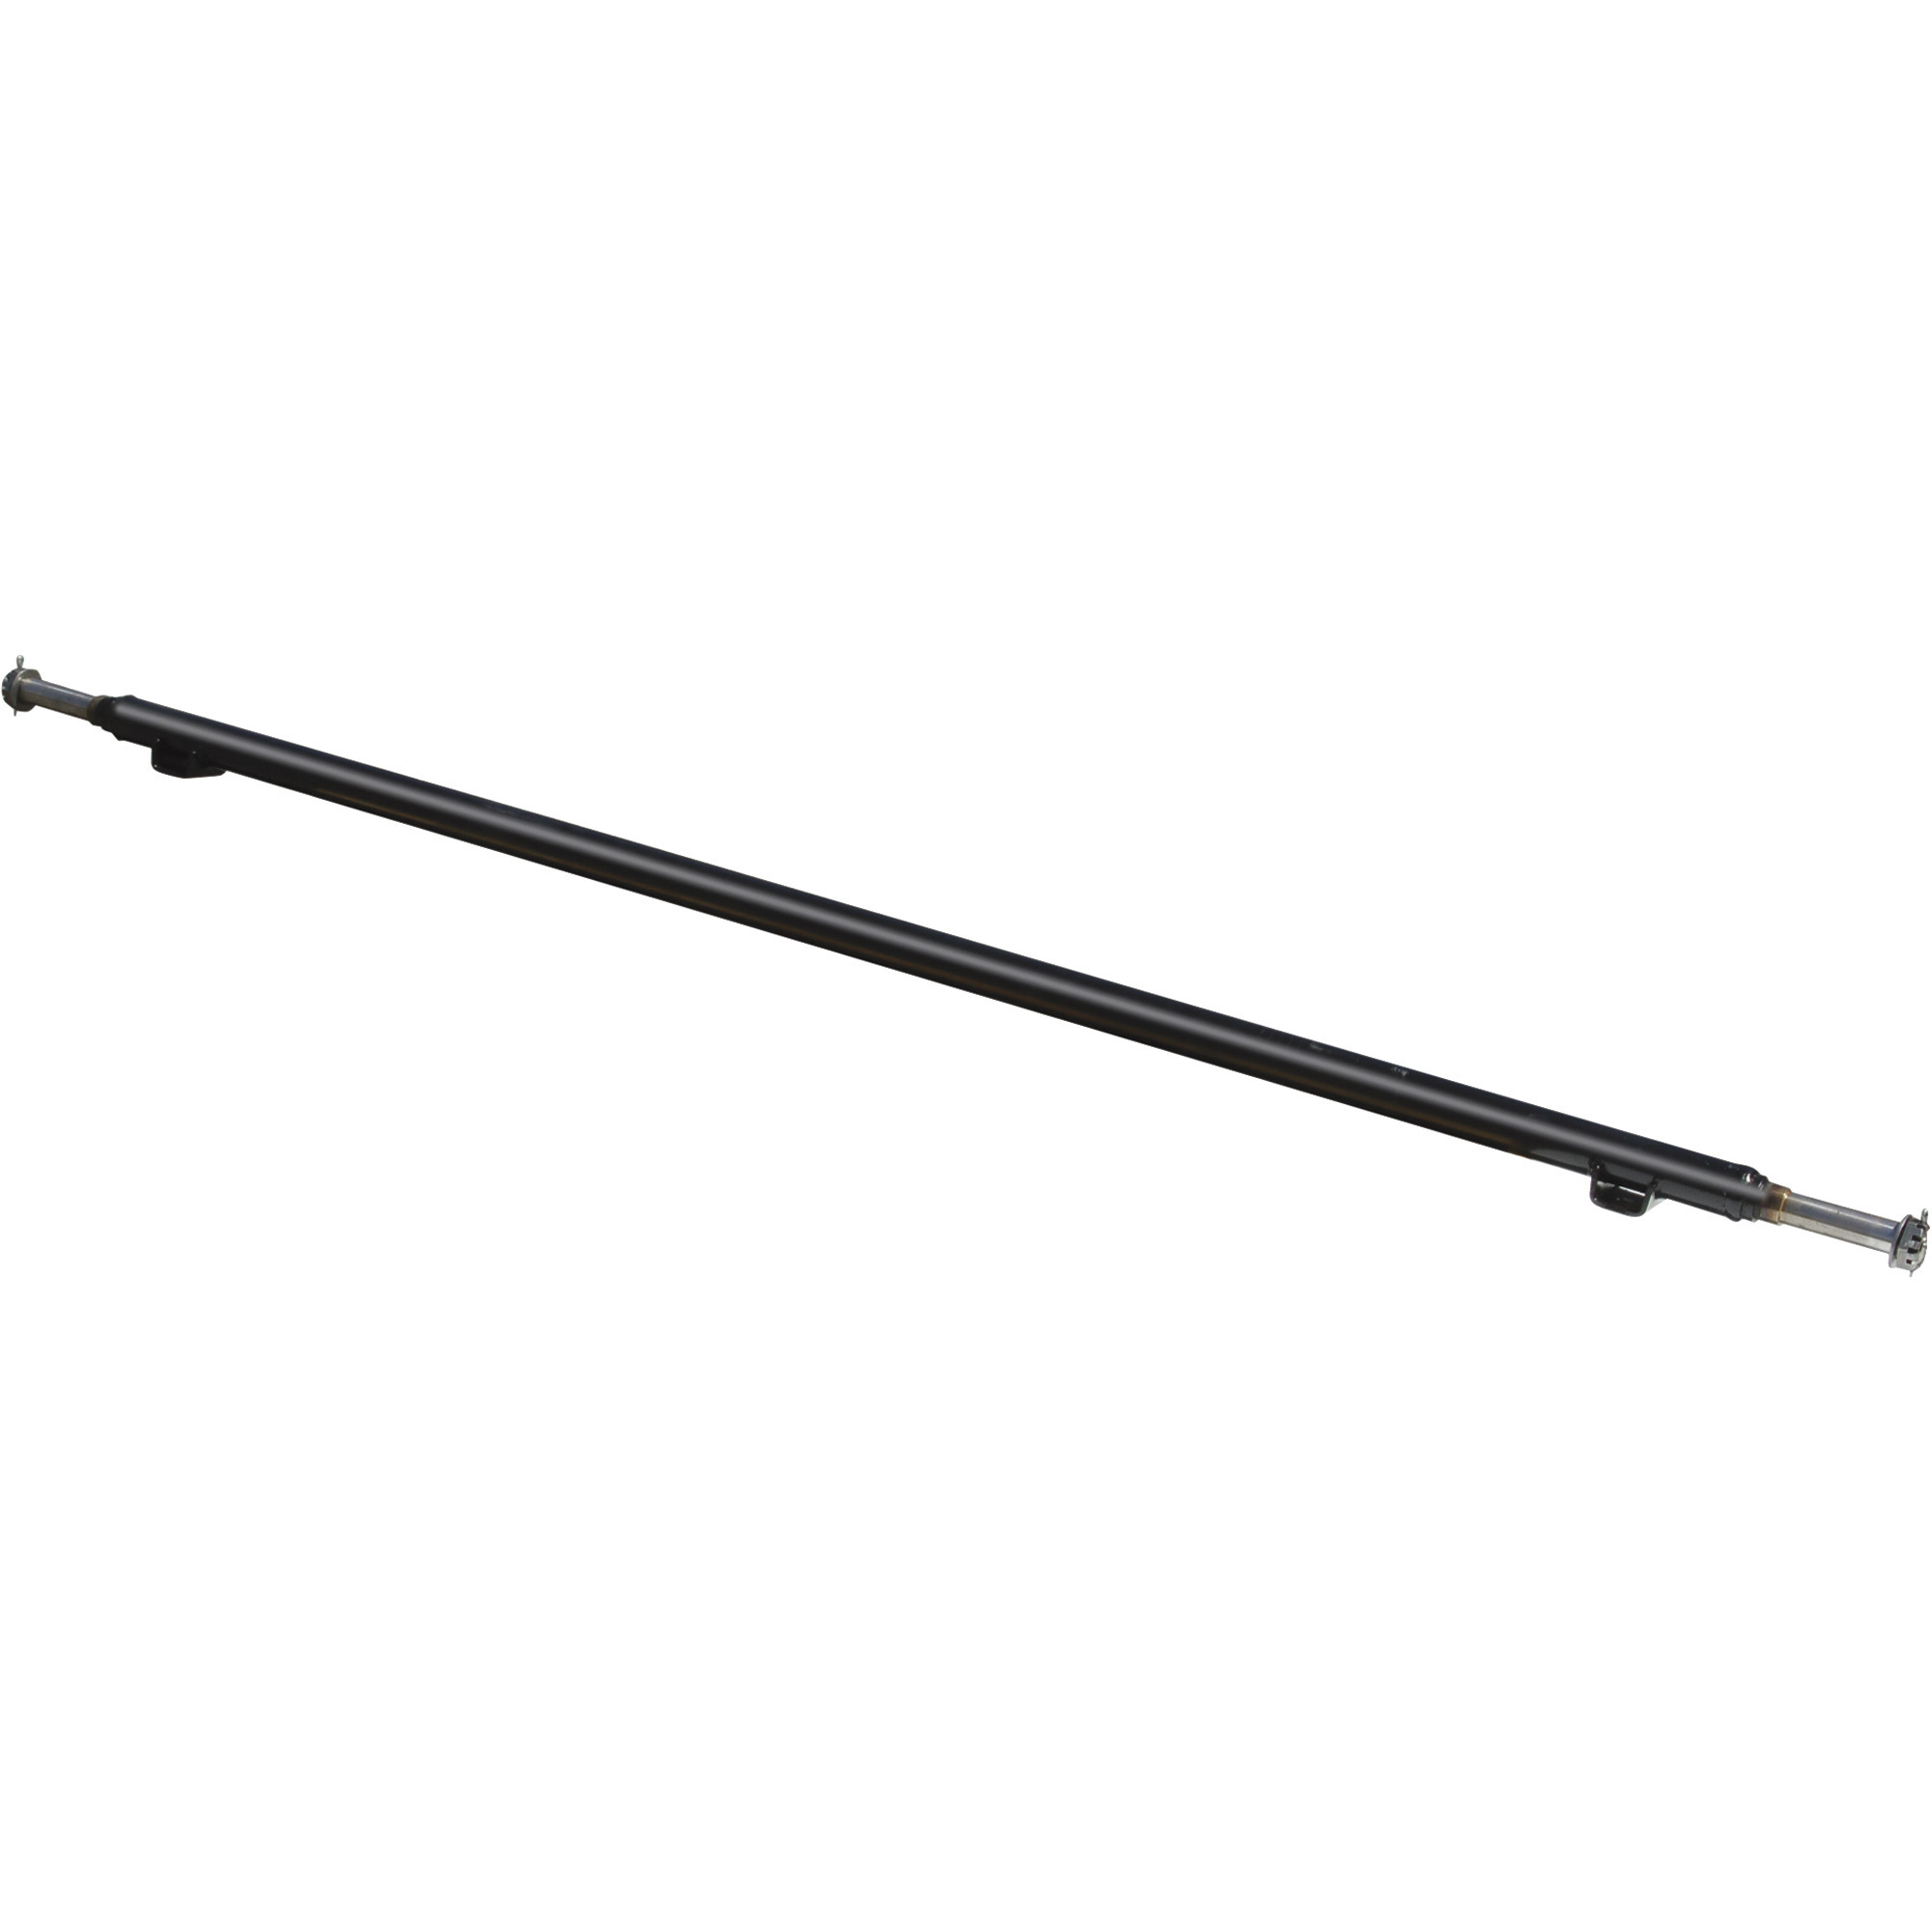 Ultra-Tow 2000-Lb. Capacity Spring Trailer Axle, 60Inch Hubface, 48Inch Spring Center, 65Inch L, Straight